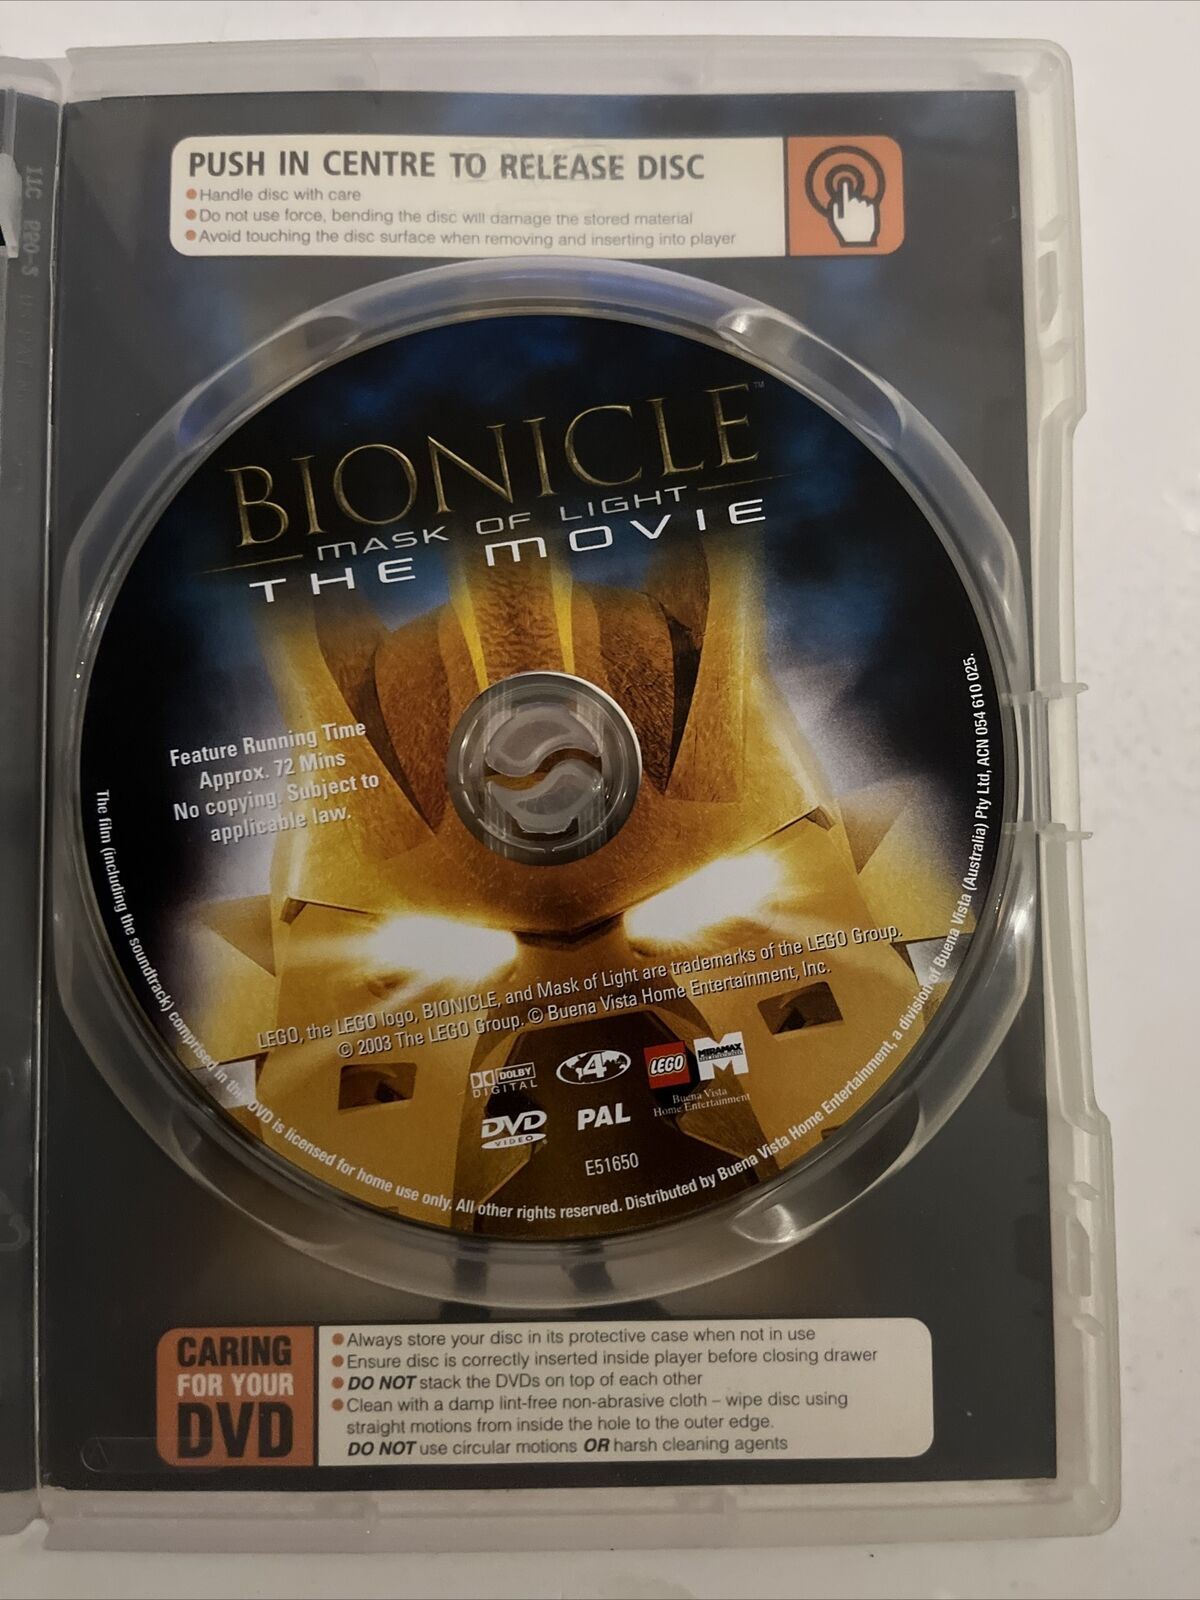 Bionicle: Mask of Light - The Movie (DVD, 2003) Region 4